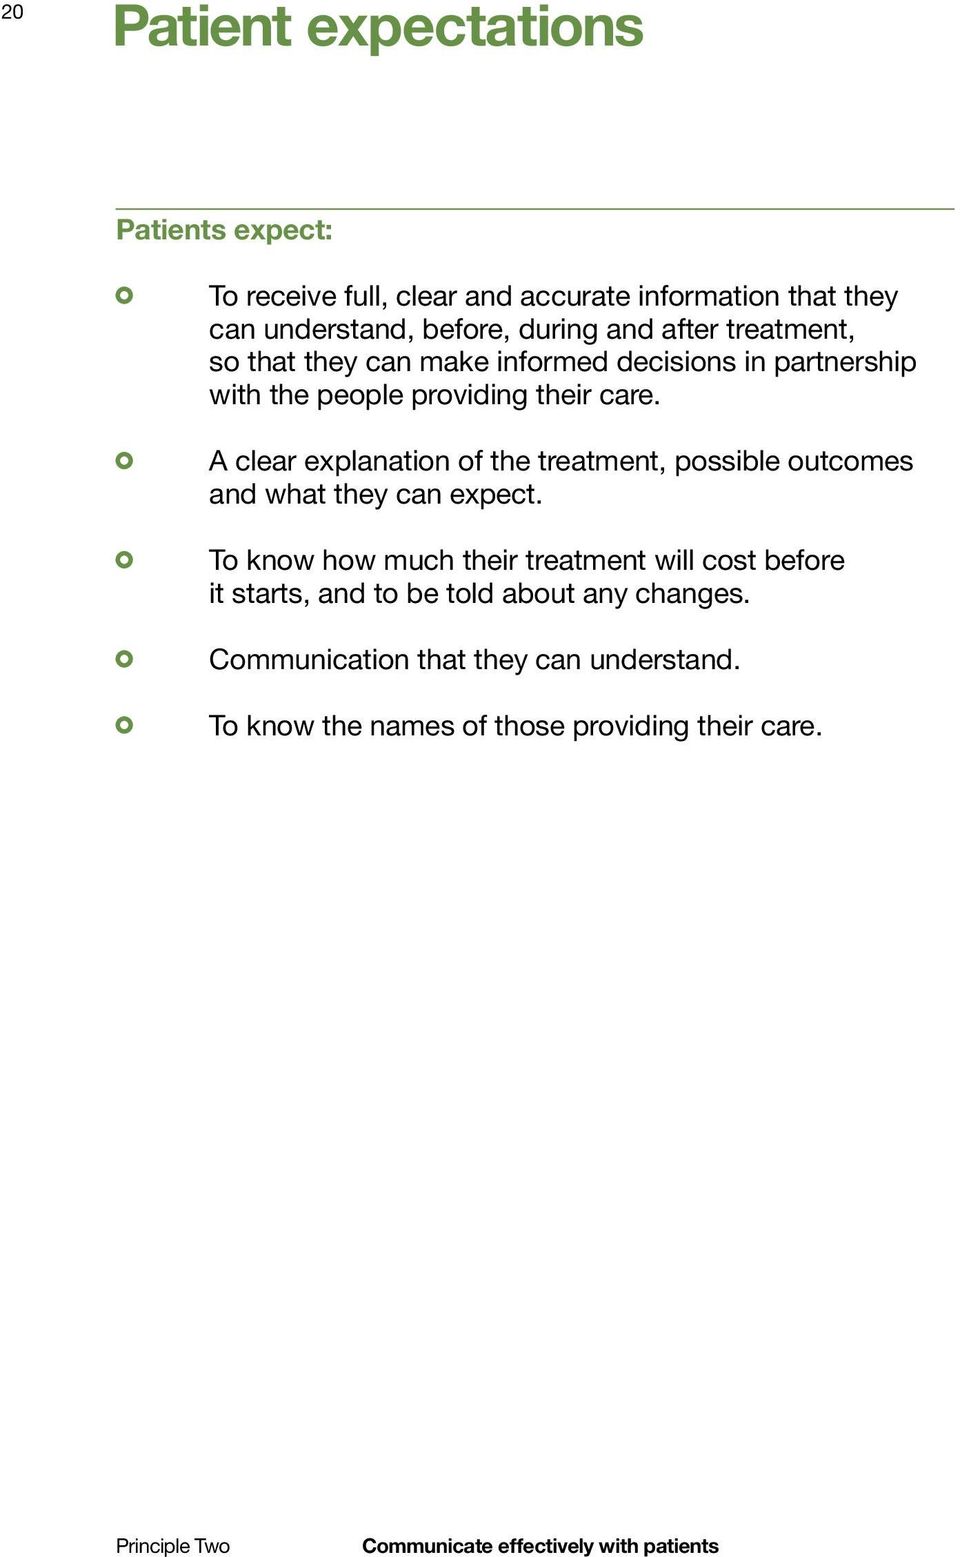 A clear explanation of the treatment, possible outcomes and what they can expect.